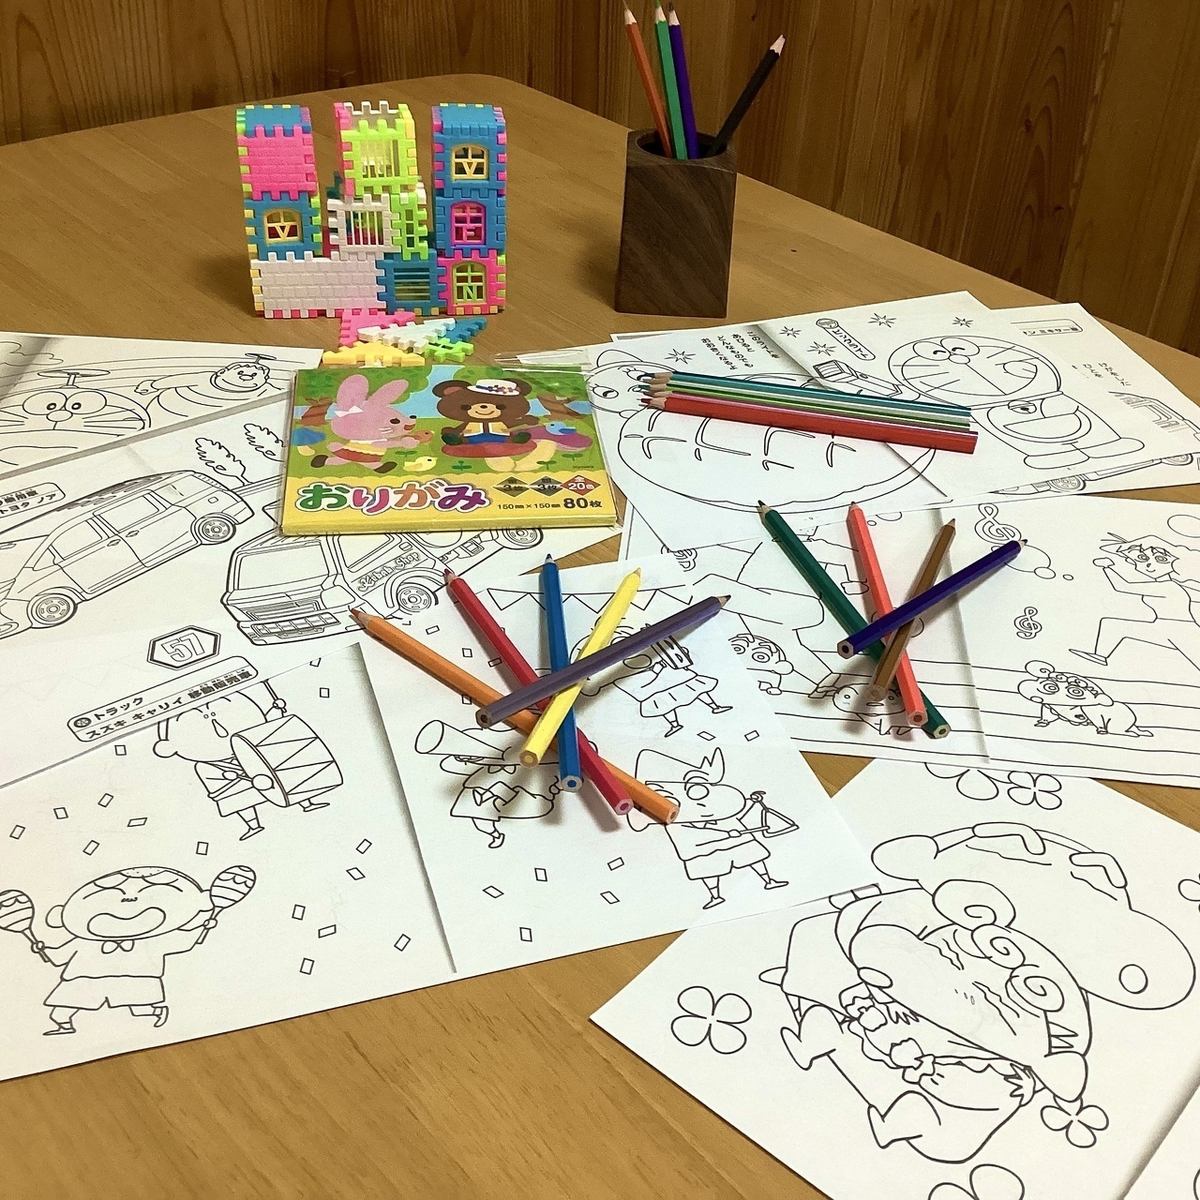 Lots of coupons! Children's space and sunken kotatsu tatami room available